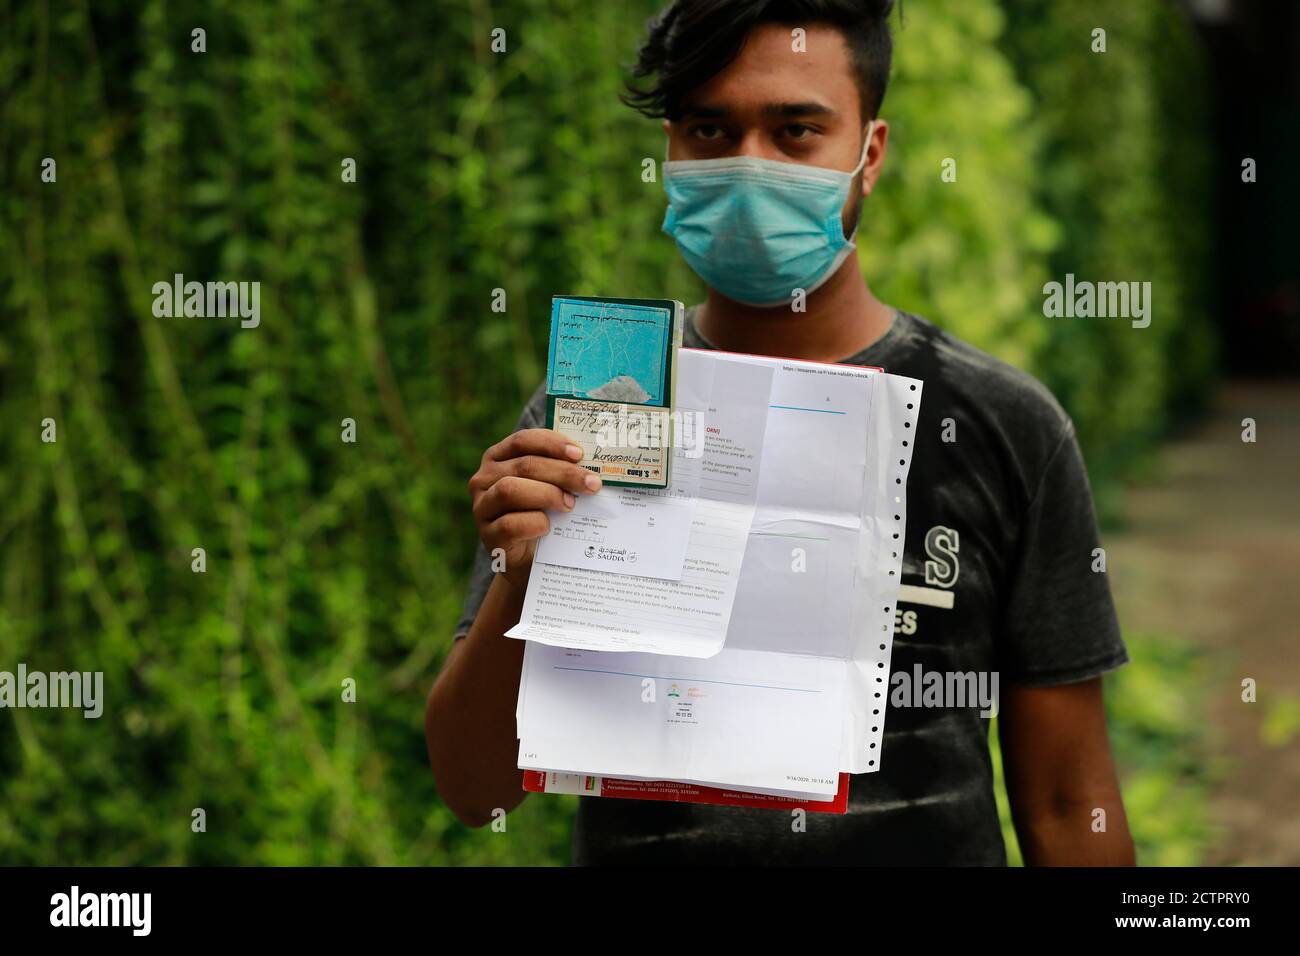 Dhaka, Bangladesh. 24th Sep, 2020. A Bangladeshi migrant worker shows his return ticket to go back to Saudi Arabia after, in Dhaka, Bangladesh, on September 24, 2020. Saudia has begun selling tickets in Dhaka, ending days of wait and demonstration by stranded Bangladeshi migrant workers. At least 30,000 Bangladeshi expatriate workers are waiting to return to their workplaces in Saudi Arabia, said an official of Saudi Airlines. More than 2 million Bangladeshi expatriates work in Saudi Arabia. Nearly half of the $18.2 billion remittances received by Bangladesh in the 2019-20 fiscal years cam Stock Photo